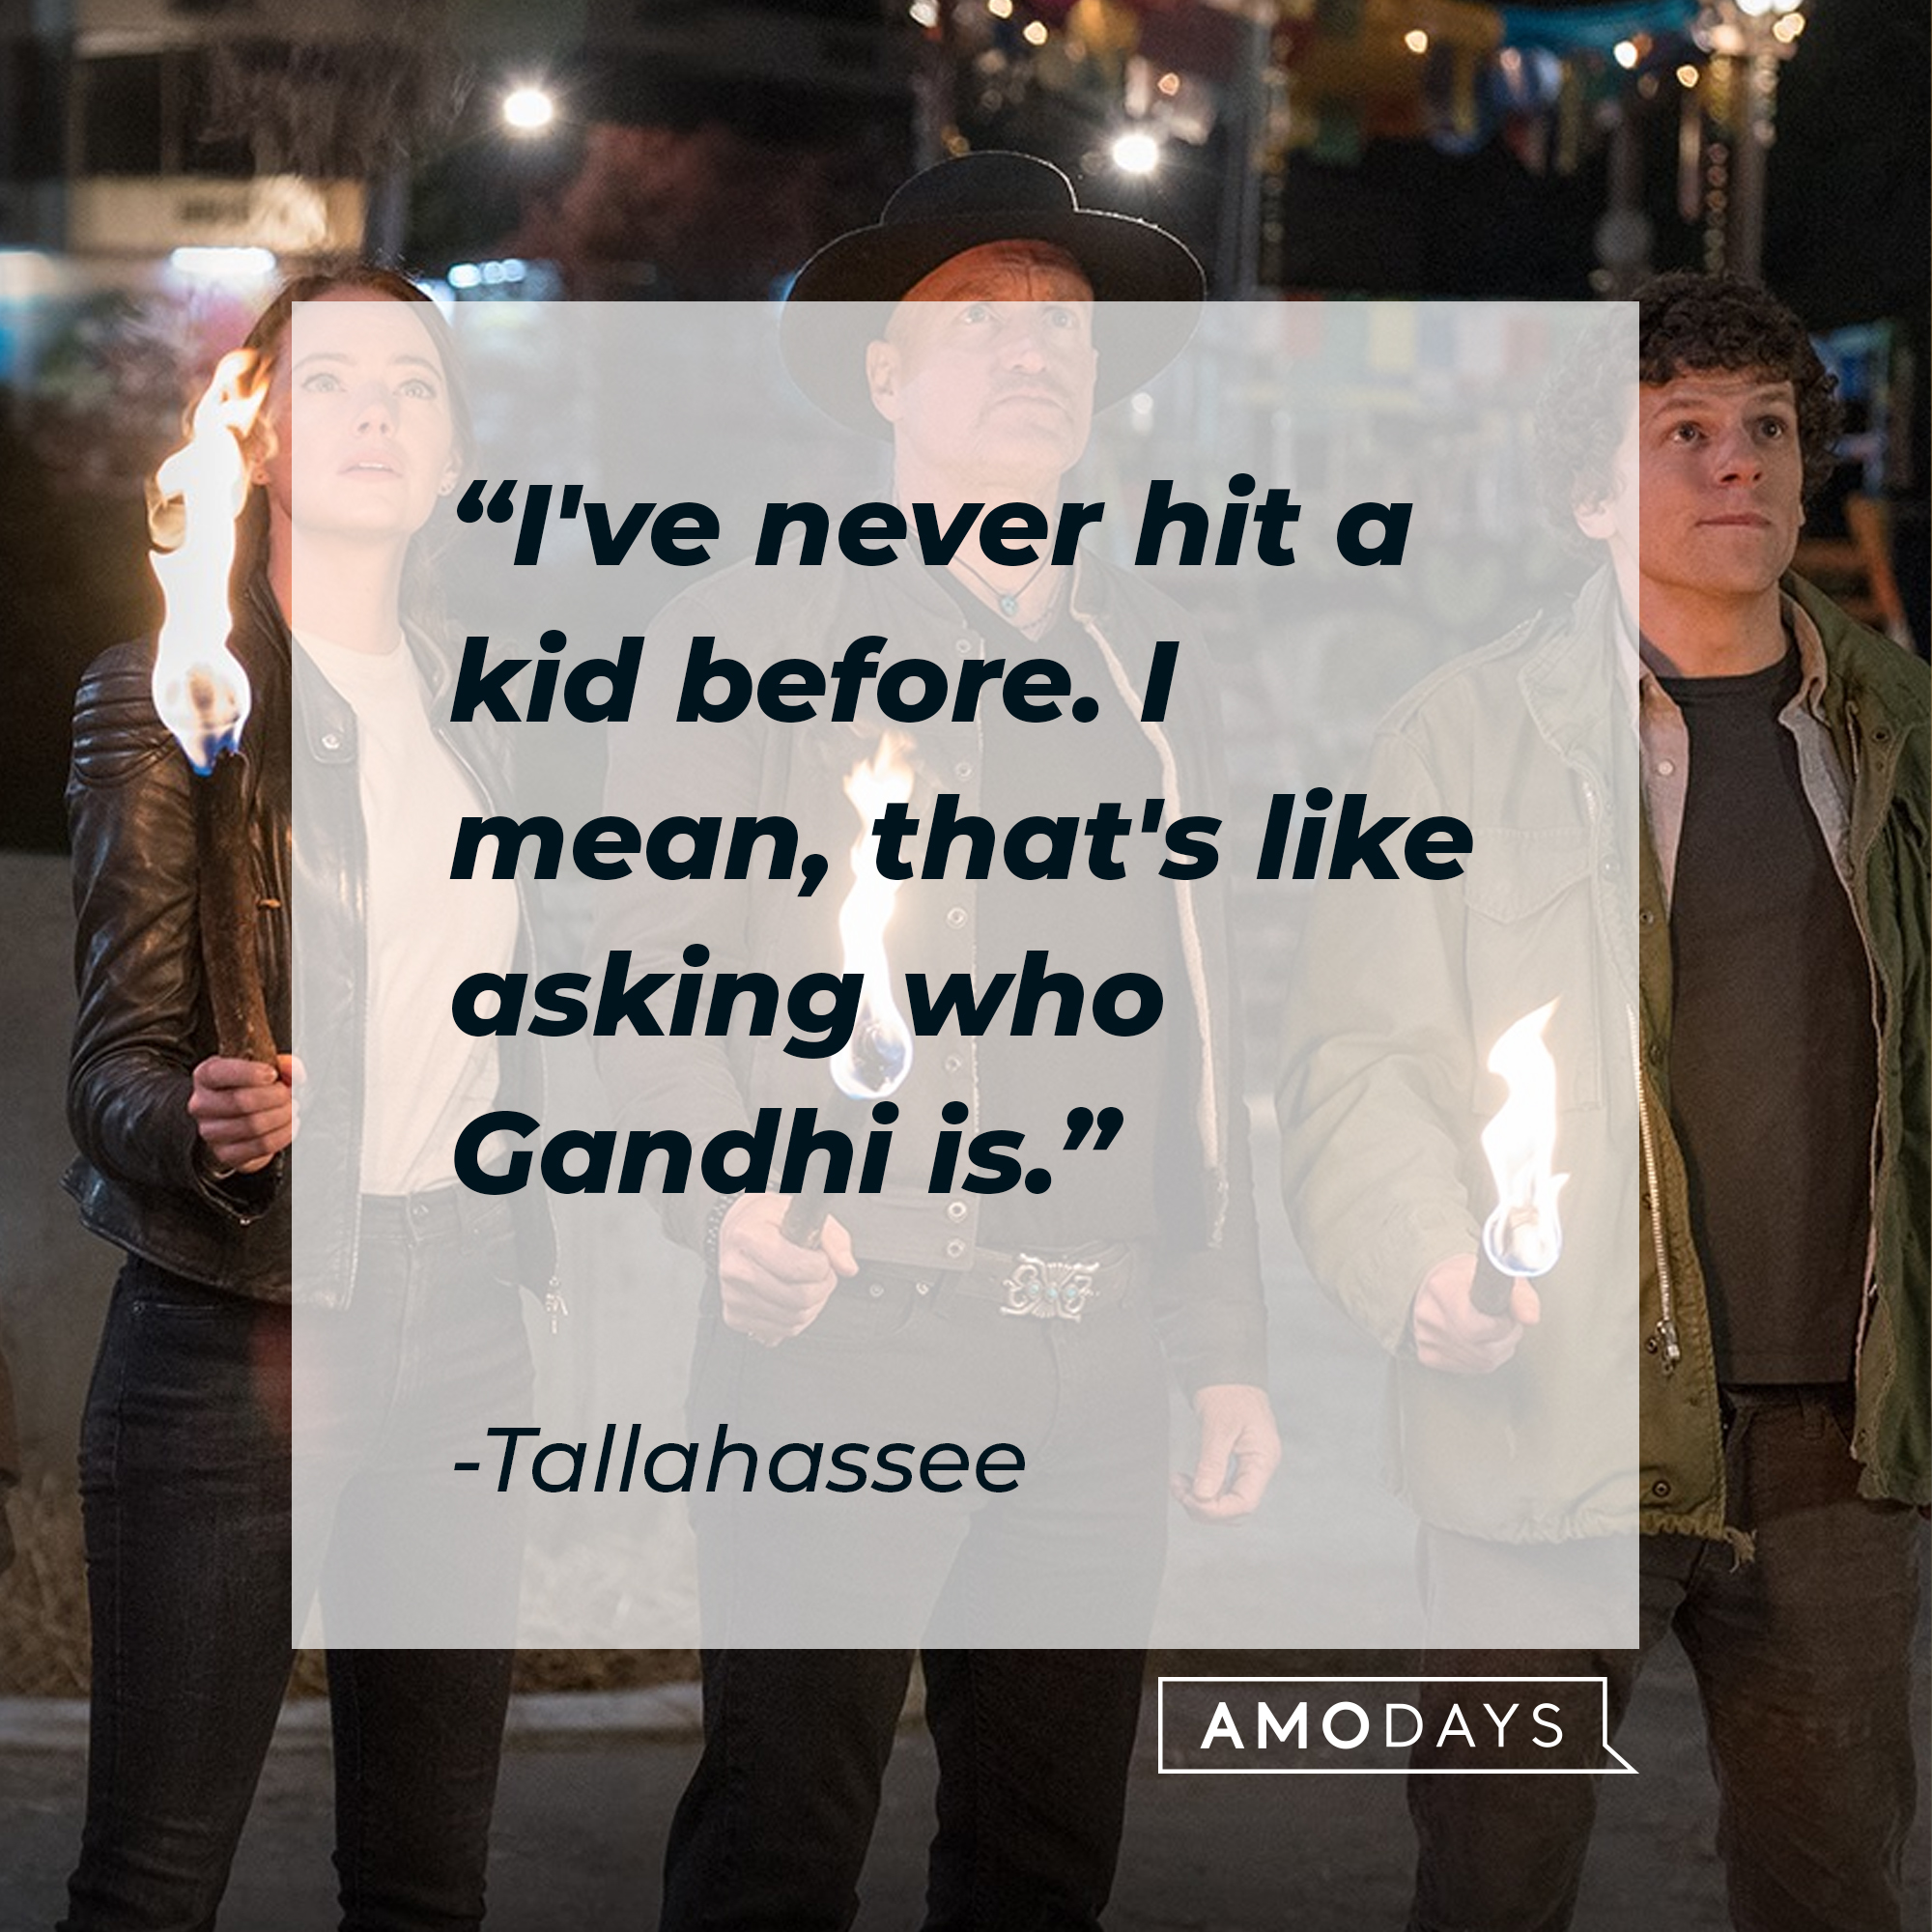 Tallahassee's quote: "I've never hit a kid before. I mean, that's like asking who Gandhi is." | Source: Facebook.com/Zombieland